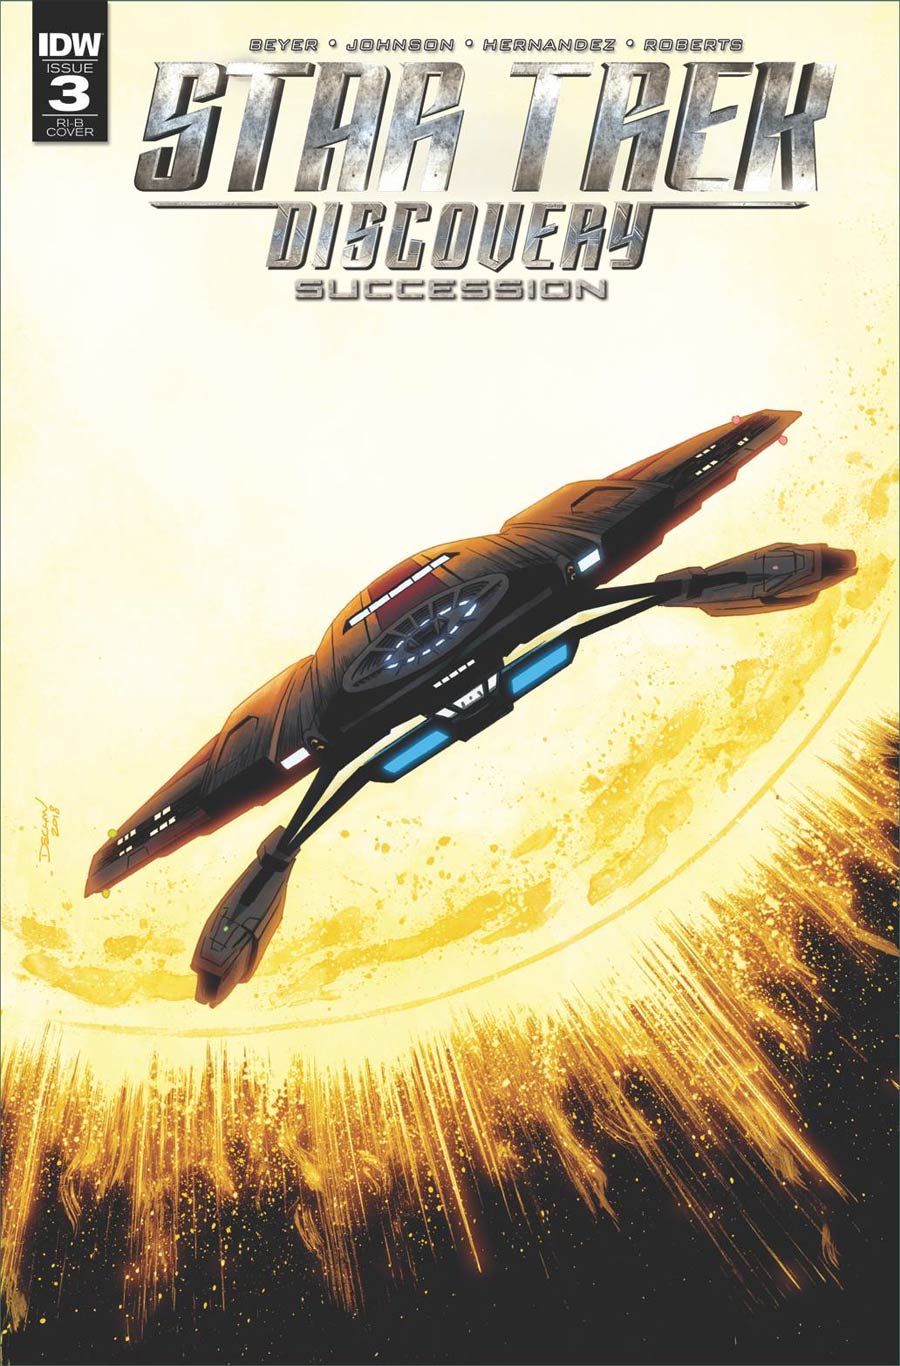 Star Trek Discovery Succession #3 Cover D Incentive Declan Shalvey & Jordie Bellaire Ships Of The Line Variant Cover